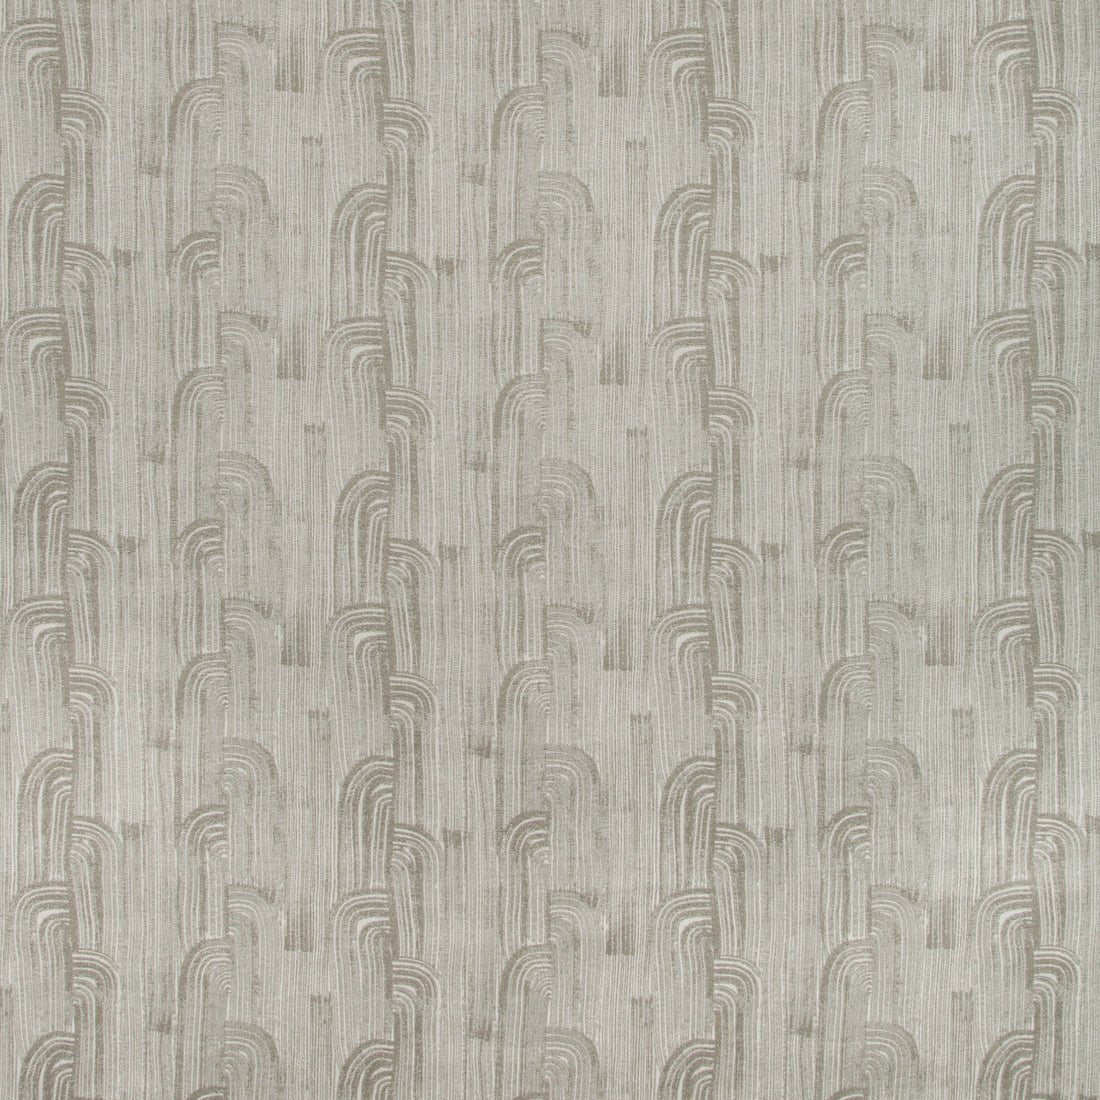 Crescent Weave fabric in gris color - pattern GWF-3737.111.0 - by Lee Jofa Modern in the Kw Terra Firma II Indoor Outdoor collection